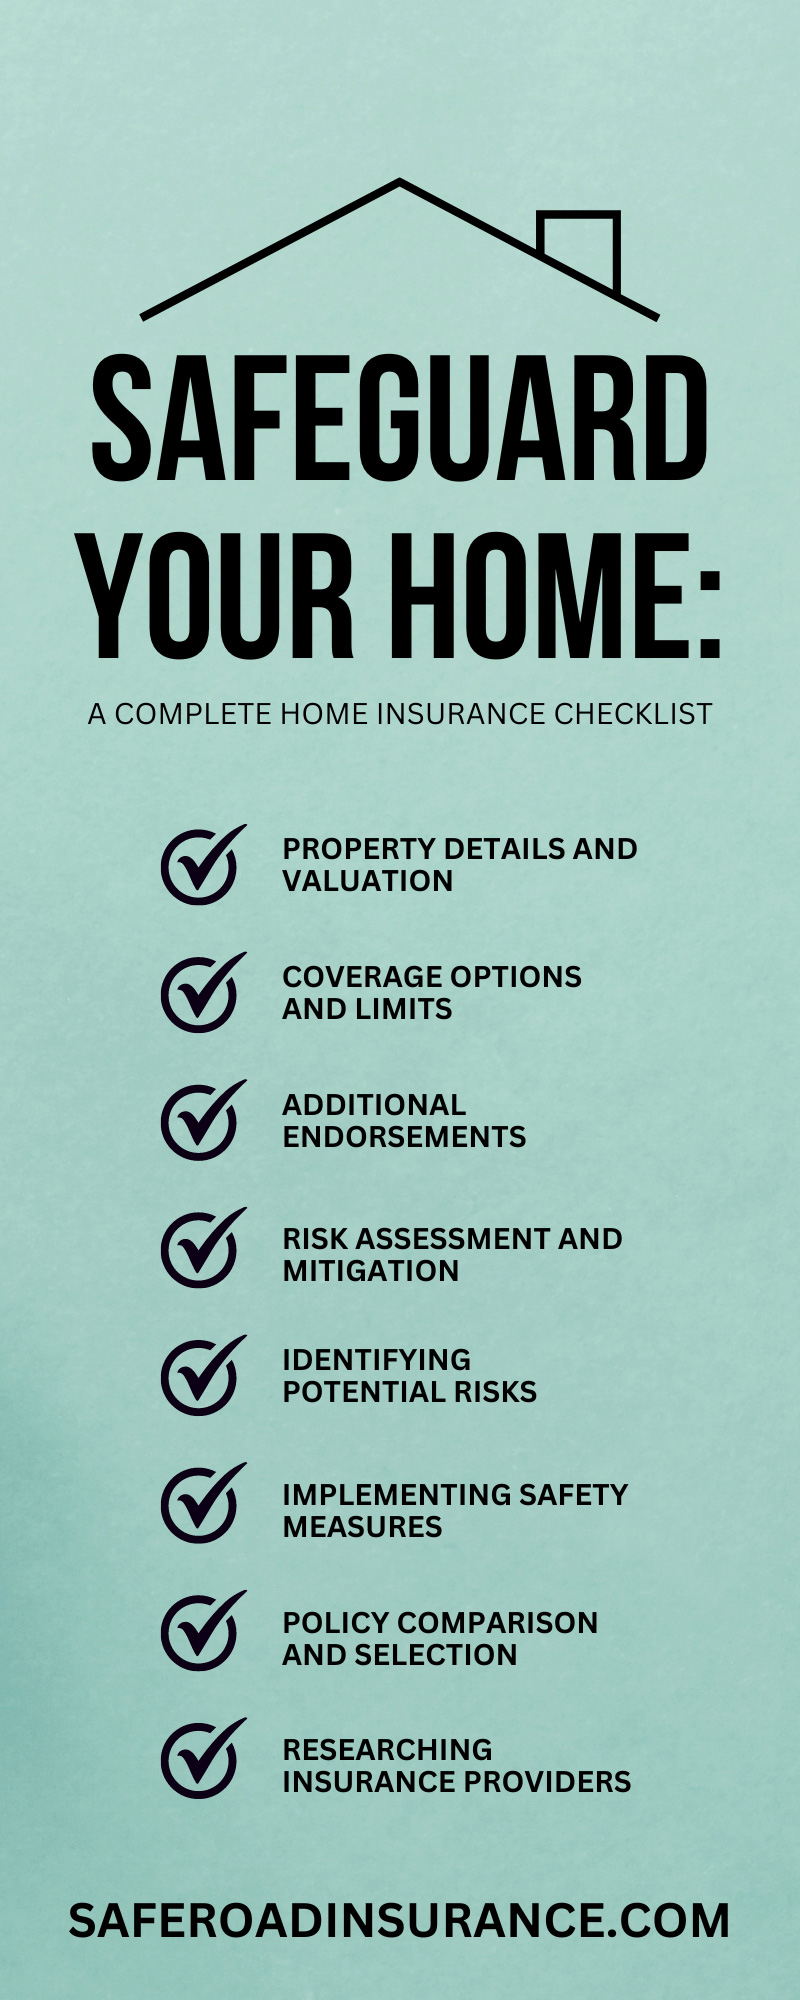 Safeguard Your Home: A Complete Home Insurance Checklist